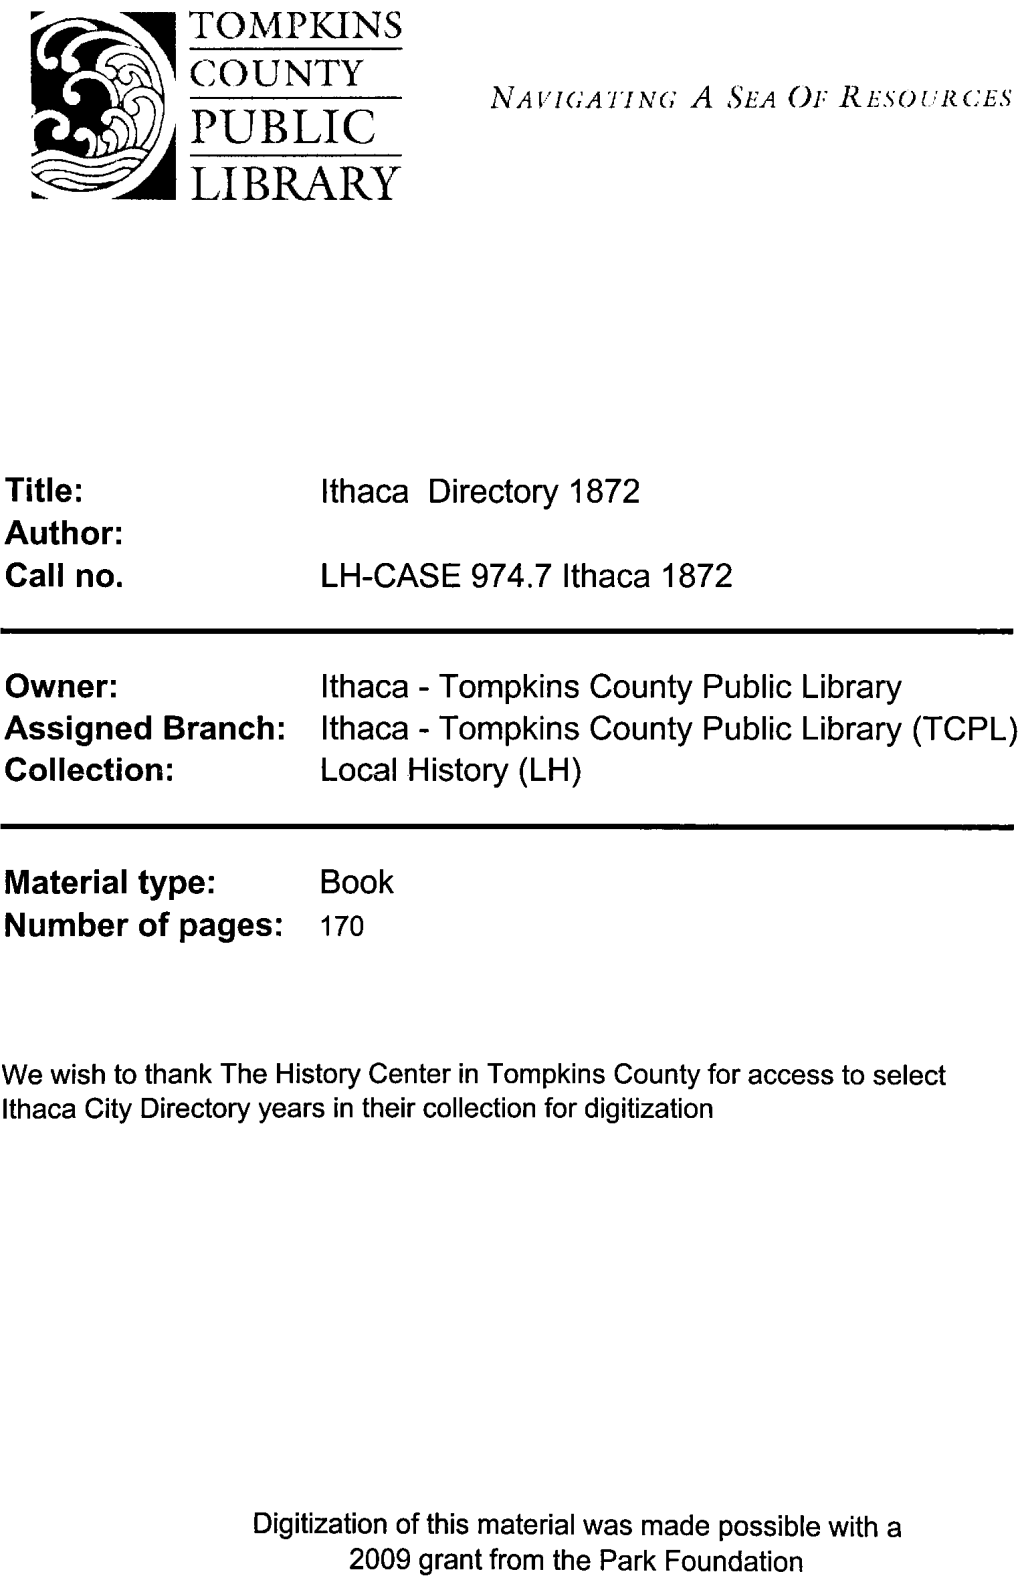 Tompkins County Public Library Assigned Branch: Ithaca - Tompkins County Public Library (TCPL) Collection: Local History (LH)